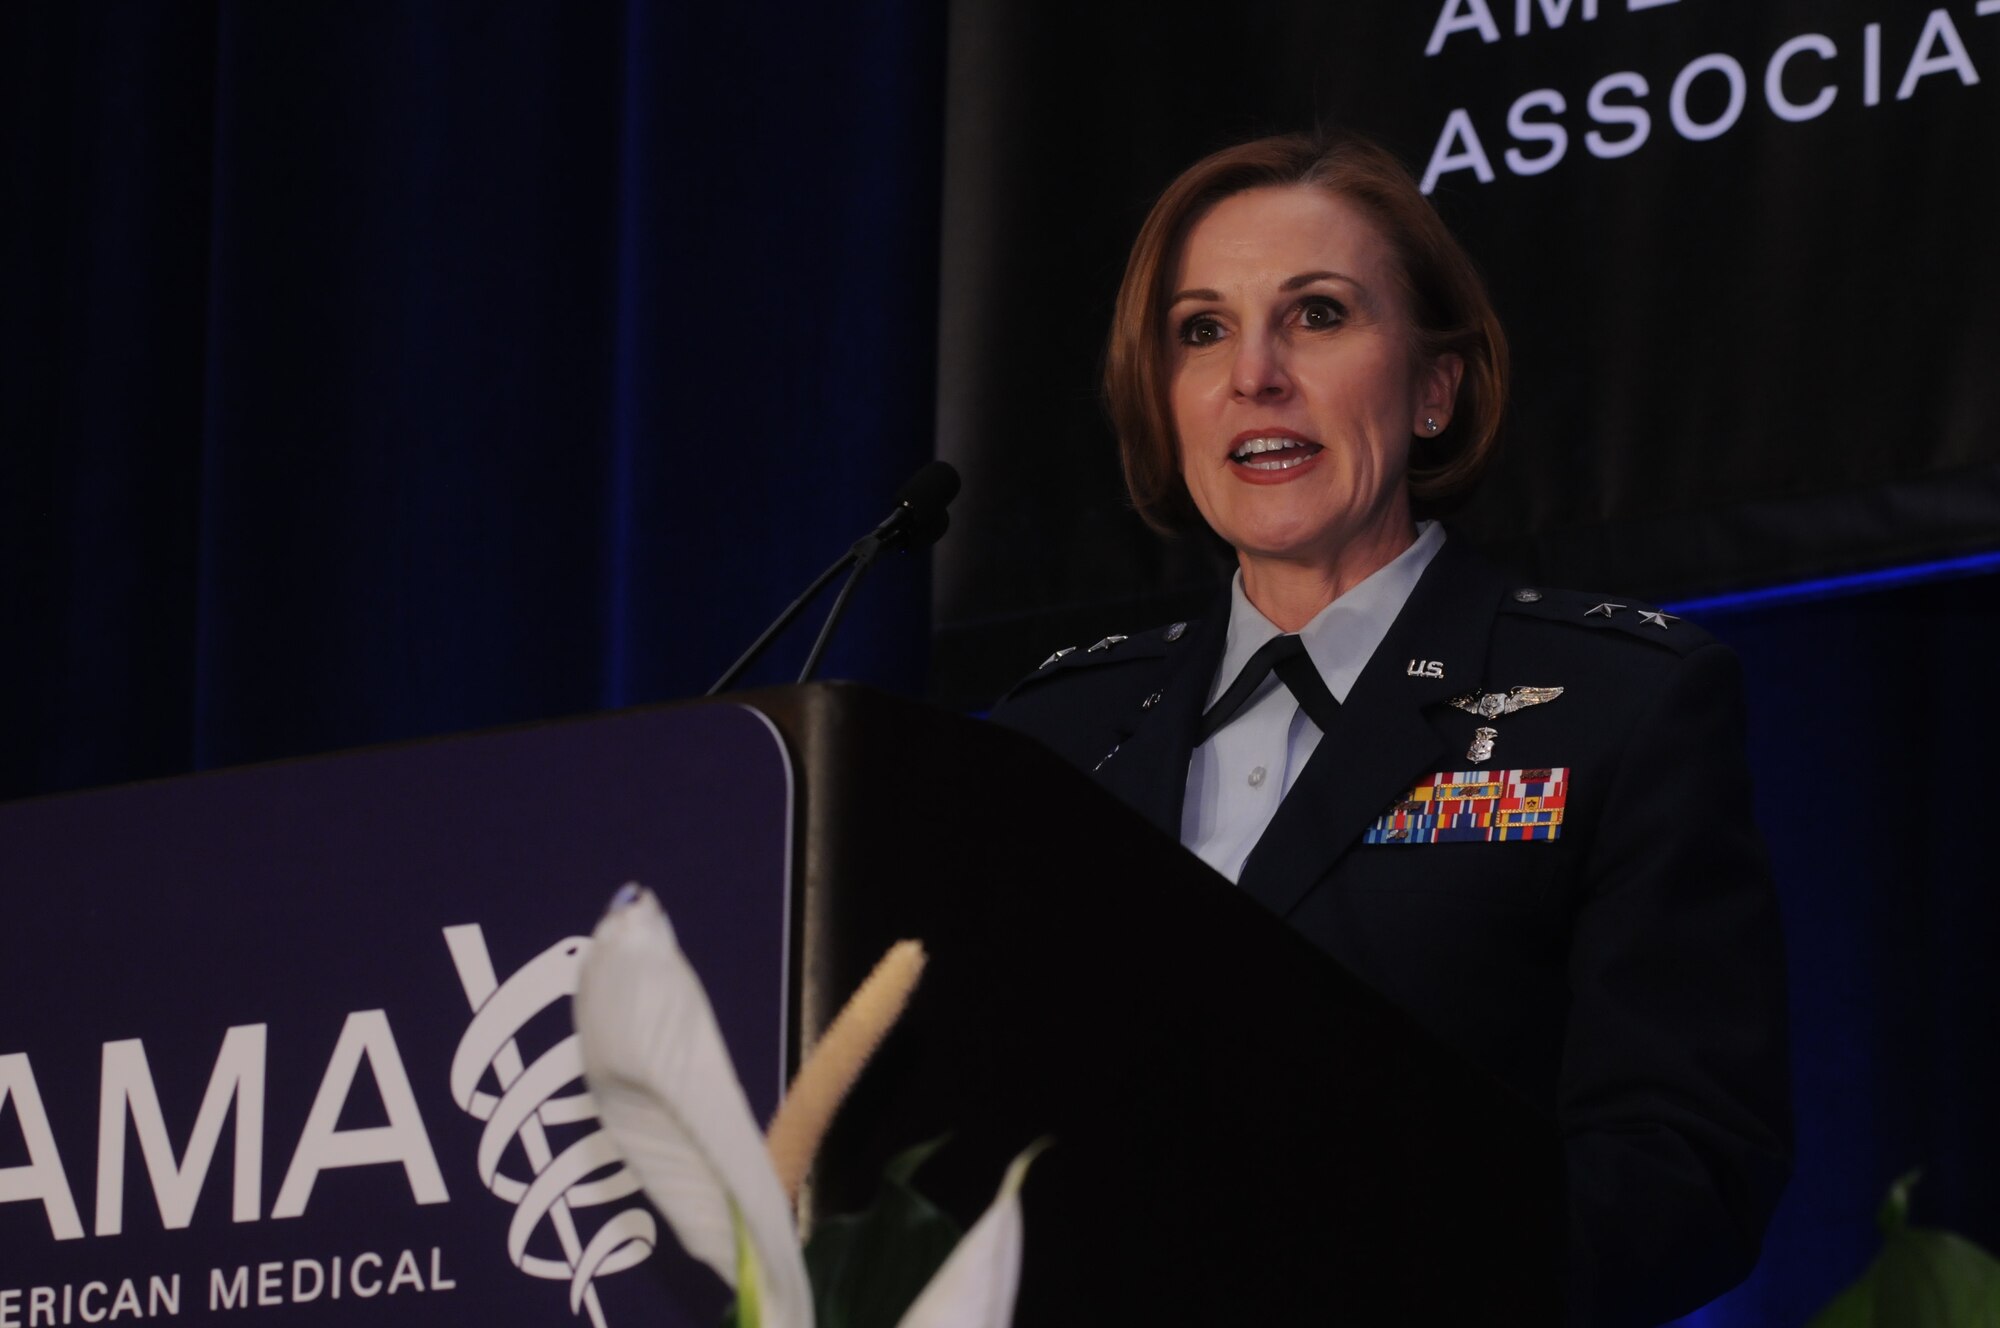 Assistant Air Force Surgeon General, medical force development and nursing services, Maj. Gen. Kimberly Siniscalchi, received the American Medical Association’s (AMA) top government service award in health care, the Dr. Nathan Davis Award for Outstanding Government Service. She was honored at the AMA’s National Advocacy Conference in Washington, D.C. on Feb 12, 2013. 